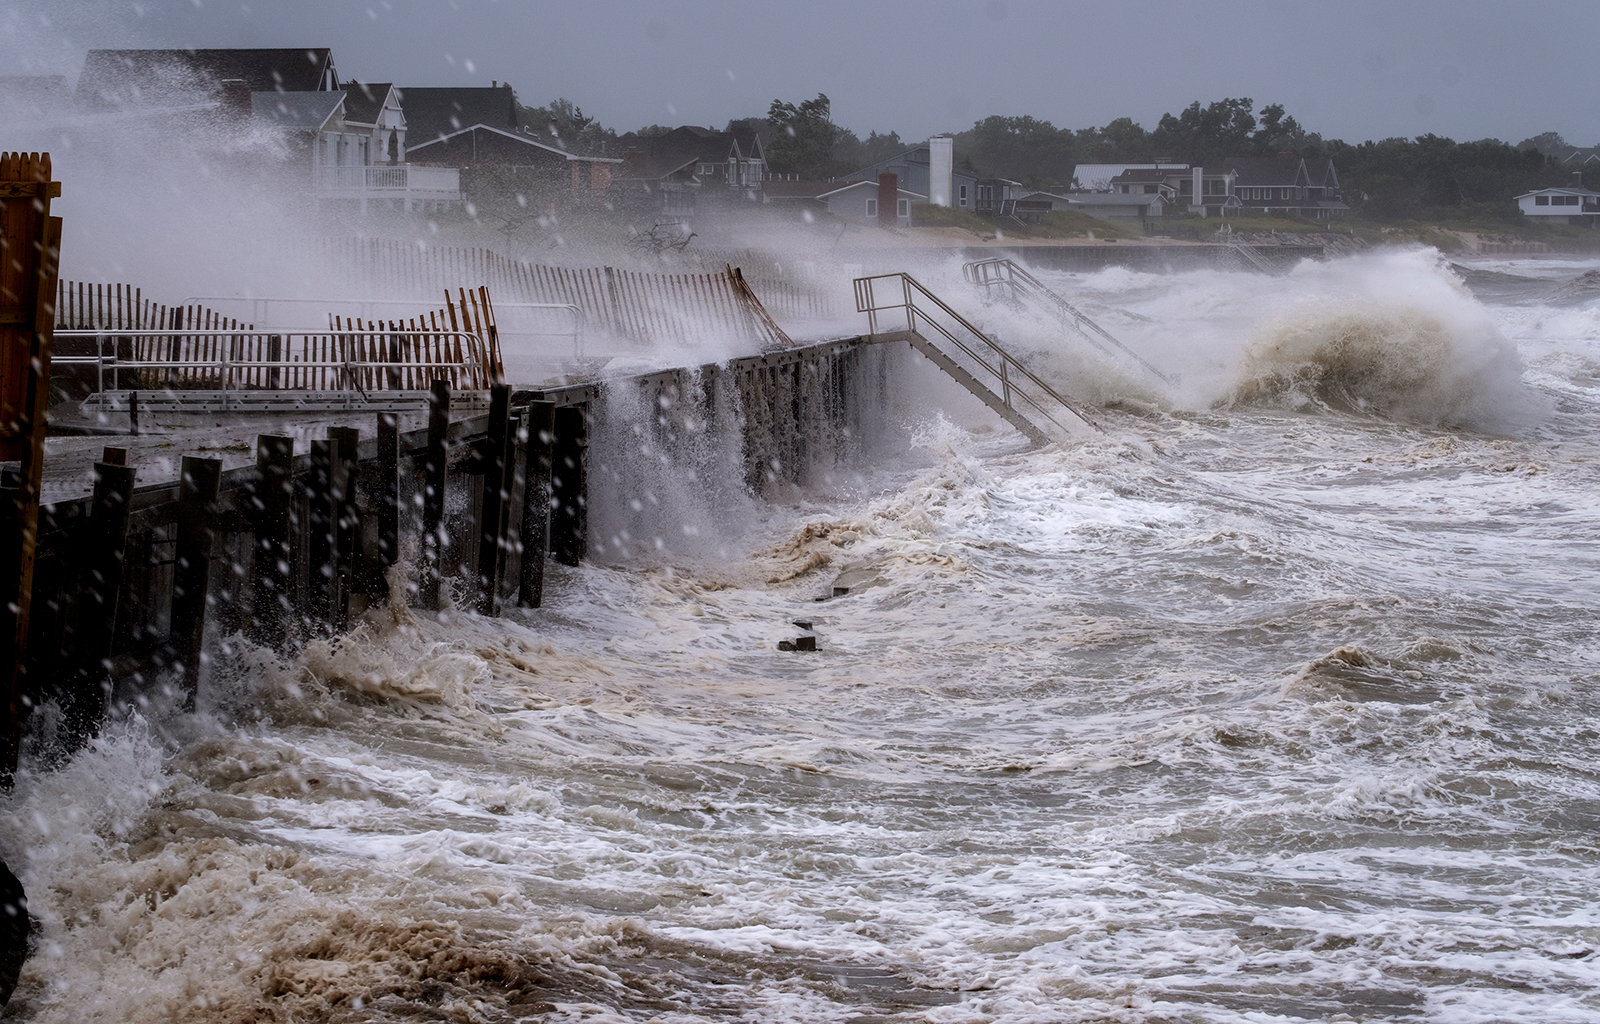 Waves pound a seawall in Montauk, New York on Sunday, August 22.